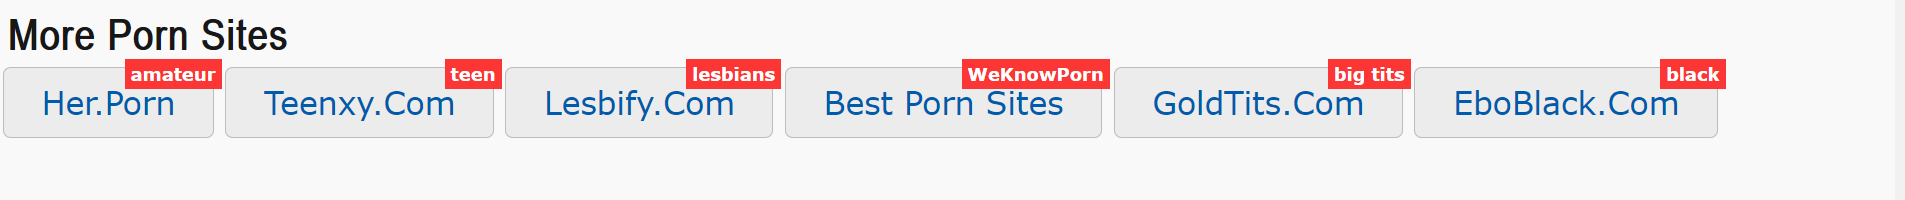 Selling Menu Bar and Footer Links - How to Build a Porn Aggregator Website